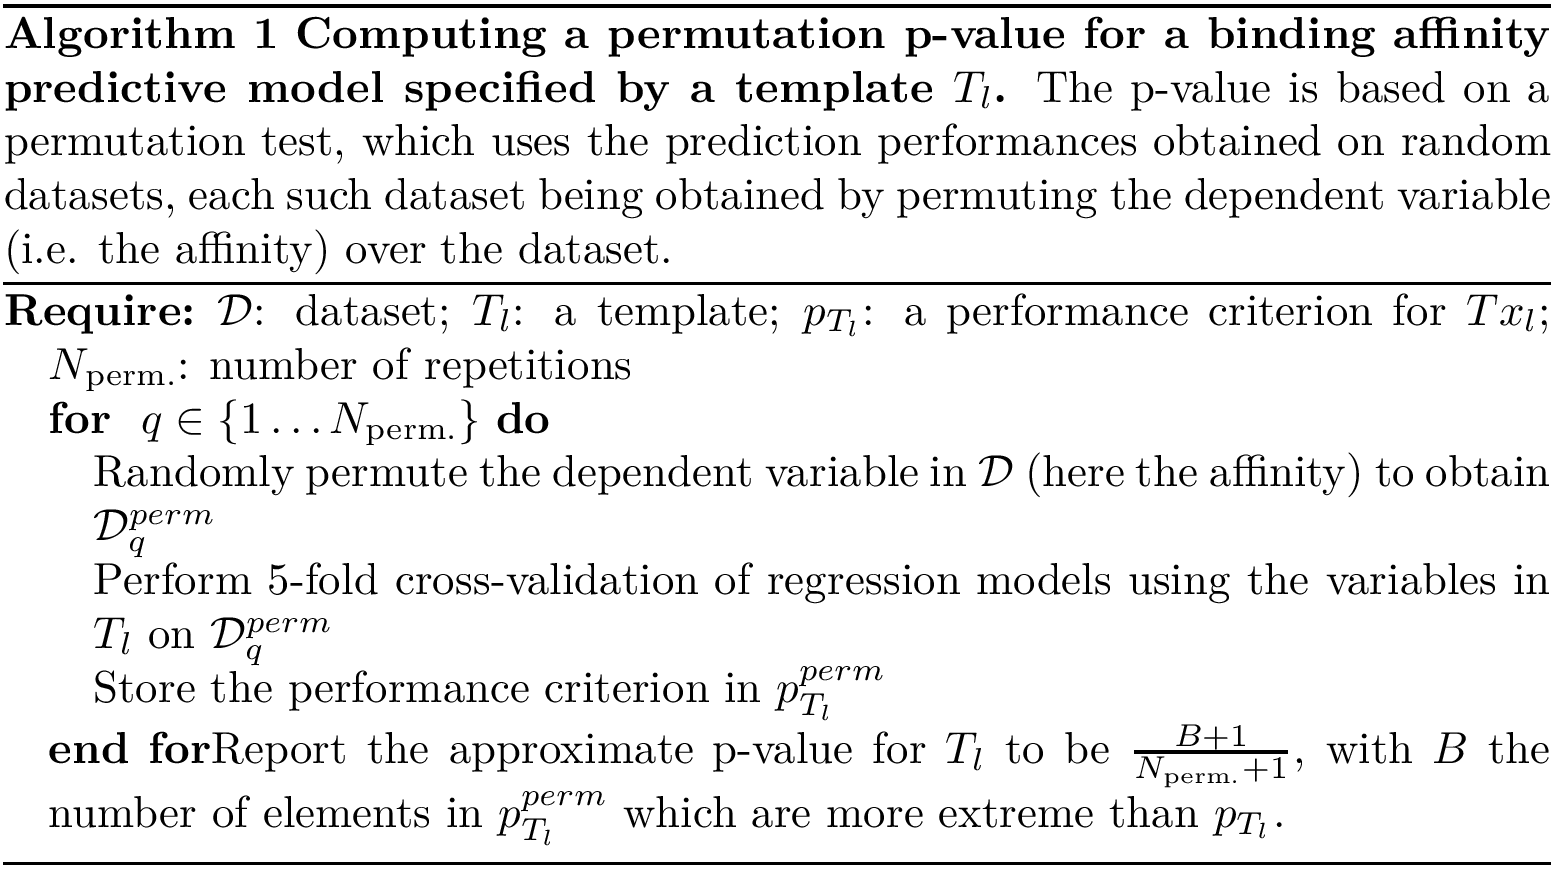 \begin{algorithm} \begin{algorithmic} \REQUIRE{$\calD$: dataset; $T_l$: a template; $p_{T_l}$: a performance criterion for $Tx_l$; $\Nperm$: number of repetitions} \FOR{ $q \in \{1 \dots \Nperm\}$} \STATE{Randomly permute the dependent variable in $\calD$ (here the affinity) to obtain $\calD^{perm}_q$} \STATE{Perform 5-fold cross-validation of regression models using the variables in $T_l$ on $\calD^{perm}_q$} \STATE{Store the performance criterion in $p^{perm}_{T_l}$} \ENDFOR Report the approximate p-value for $T_l$ to be $\frac{B+1}{\Nperm + 1}$, with $B$ the number of elements in $p^{perm}_{T_l}$ which are more extreme than $p_{T_l}$. \end{algorithmic} \caption{{\bf Computing a permutation p-value for a binding affinity predictive model specified by a template $T_l$.} The p-value is based on a permutation test, which uses the prediction performances obtained on random datasets, each such dataset being obtained by permuting the dependent variable (i.e. the affinity) over the dataset.} \end{algorithm}